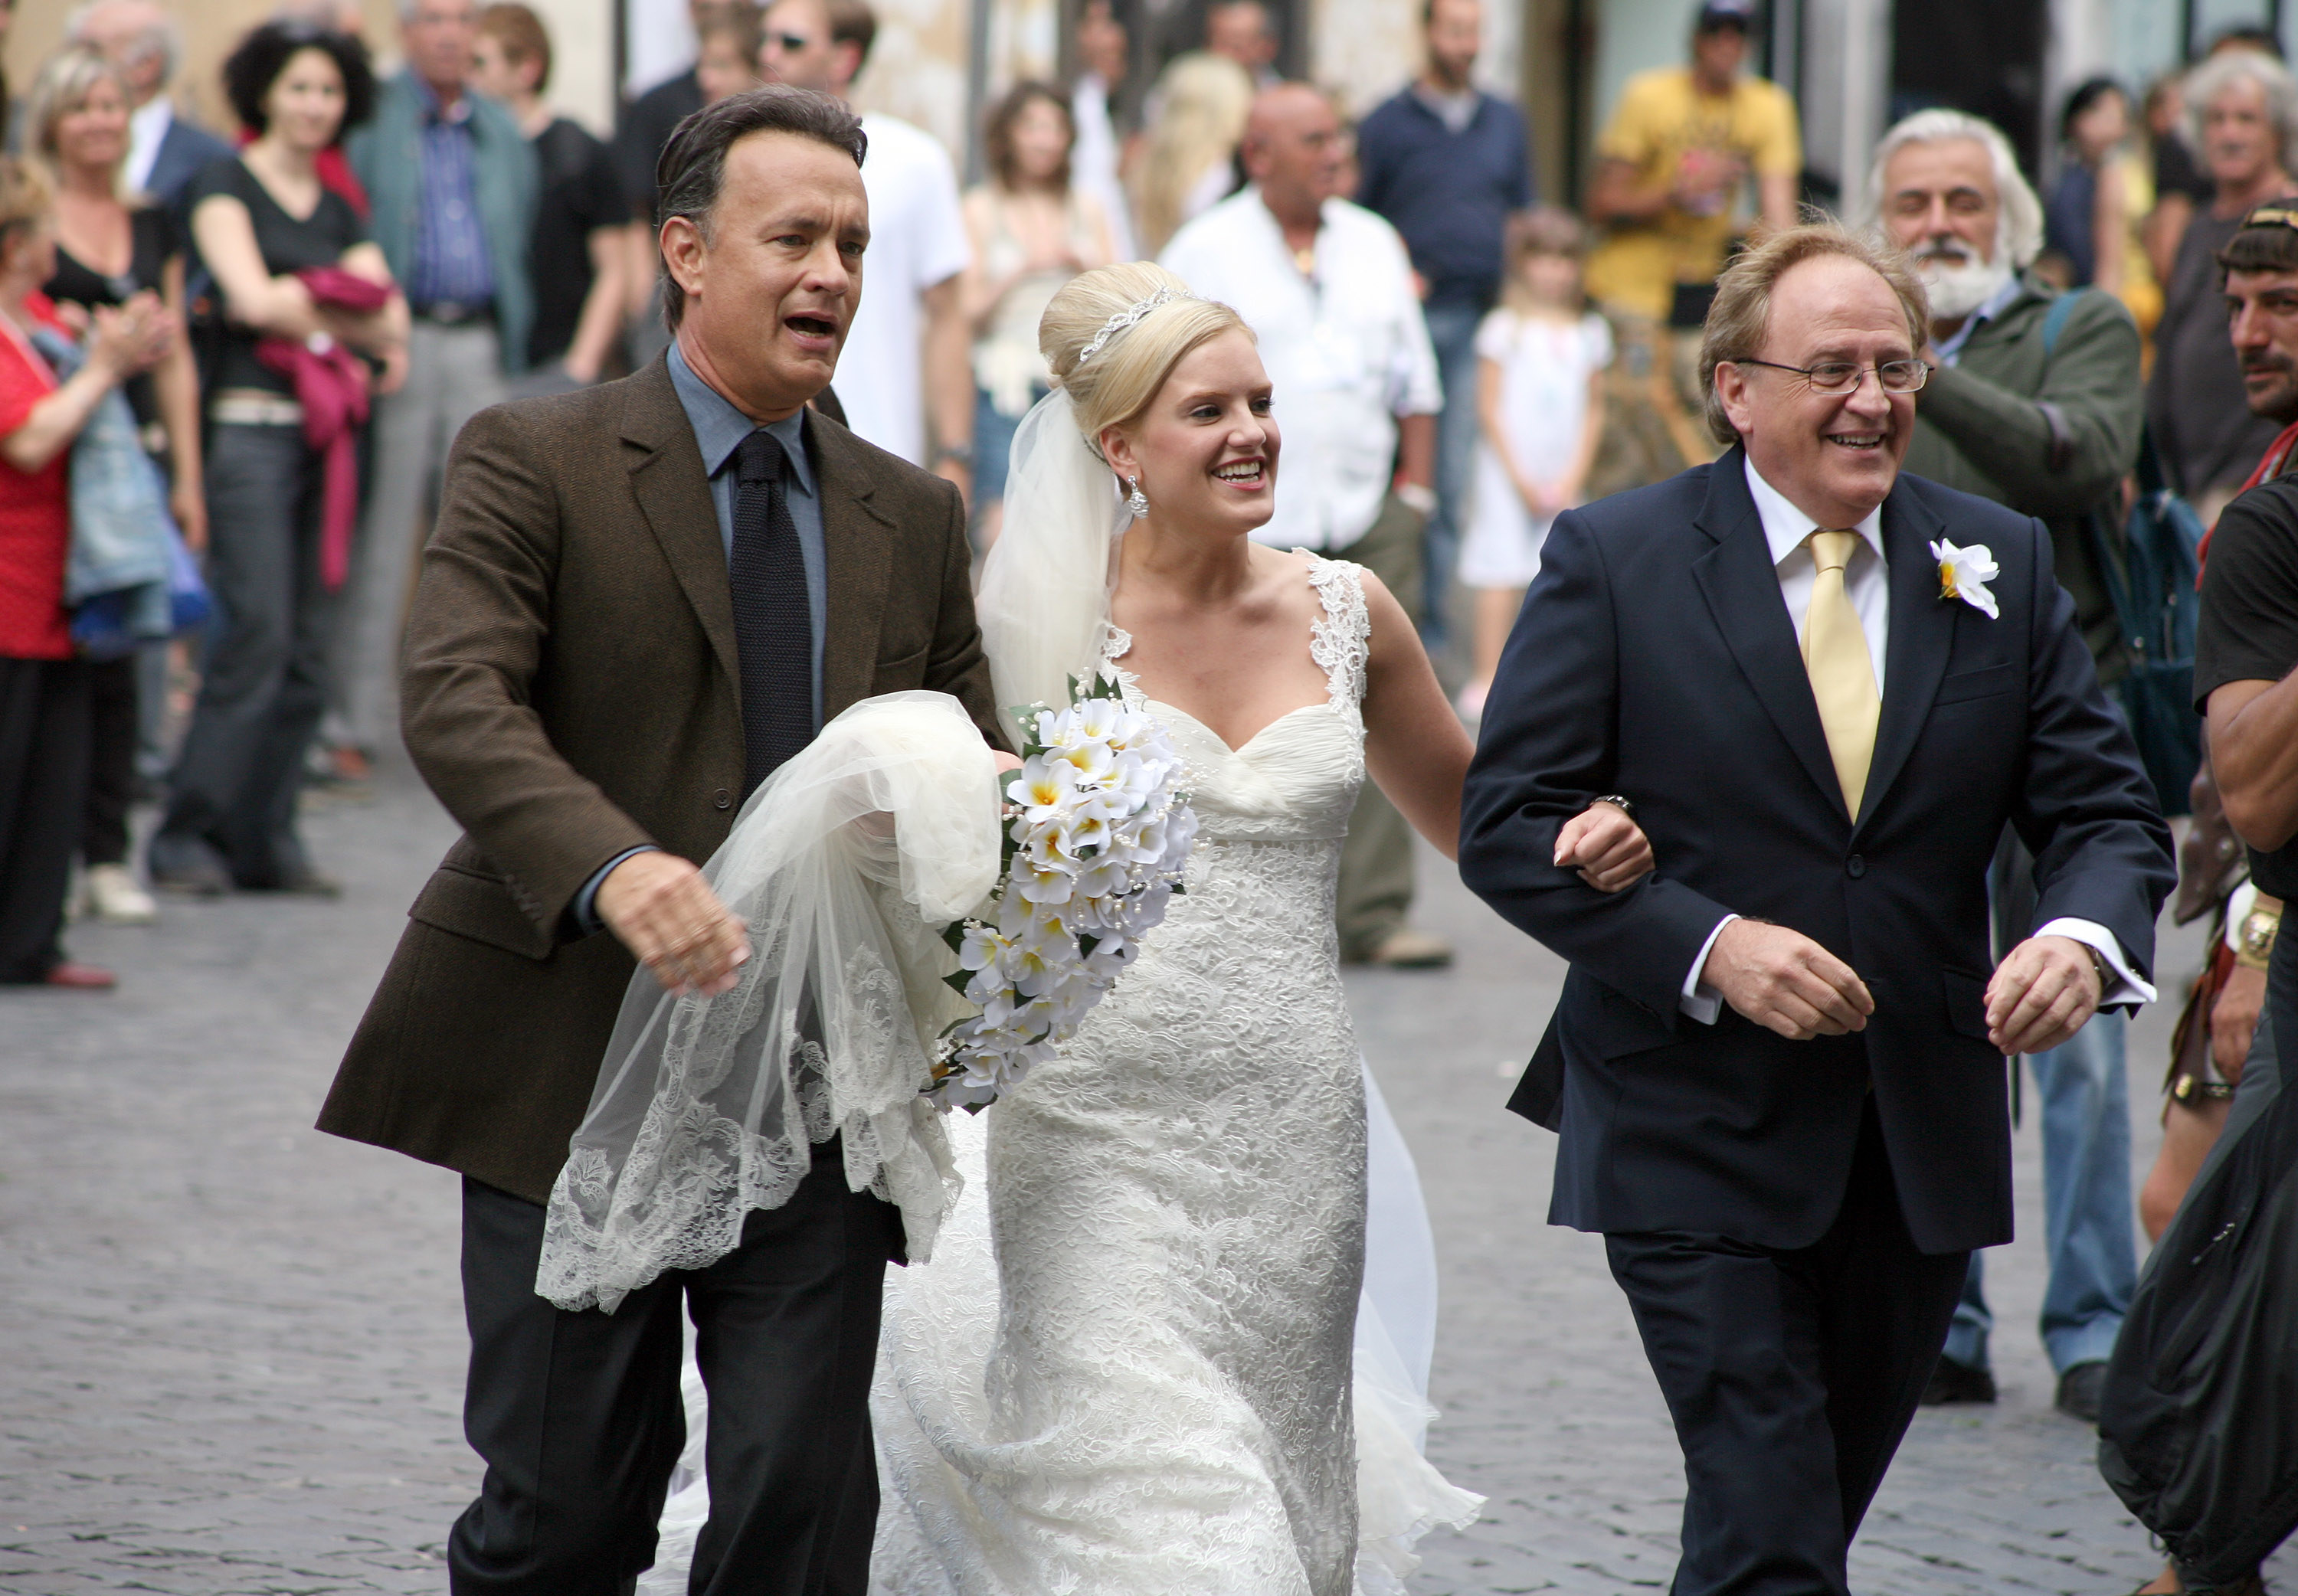 Tom links arms with a bride and her dad while walking in Rome